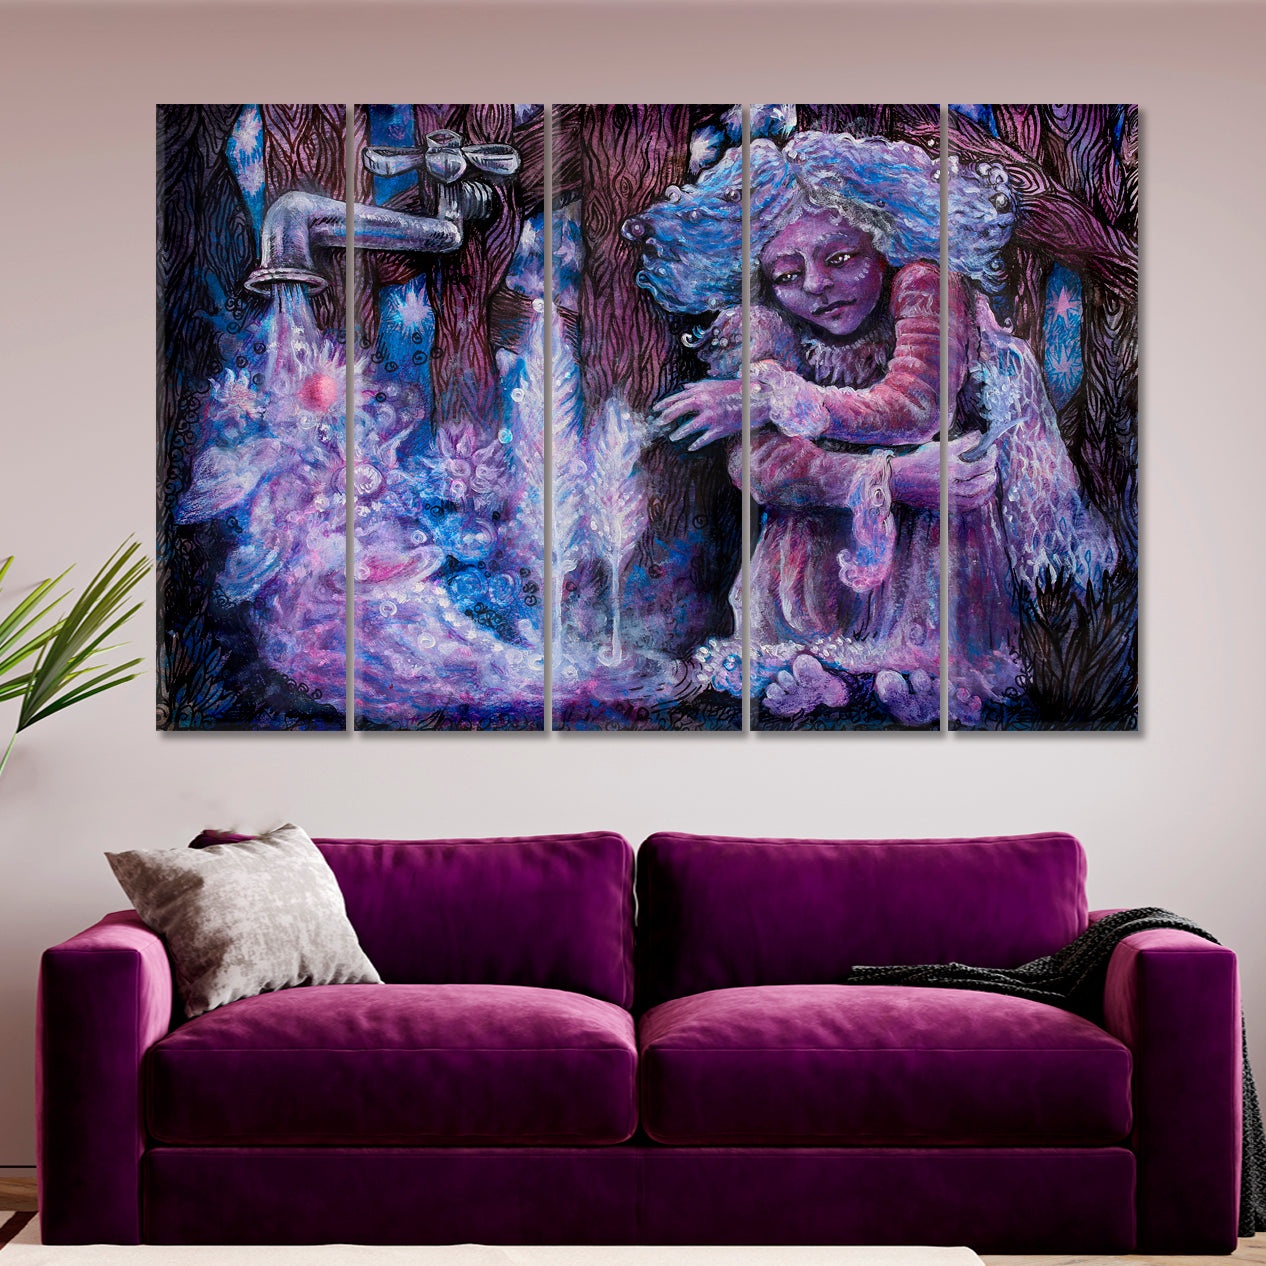 Dreamy Lilac Fairy Magic Pouring Starry Water Contemplative Poster Surreal Fantasy Large Art Print Décor Artesty 5 panels 36" x 24" 